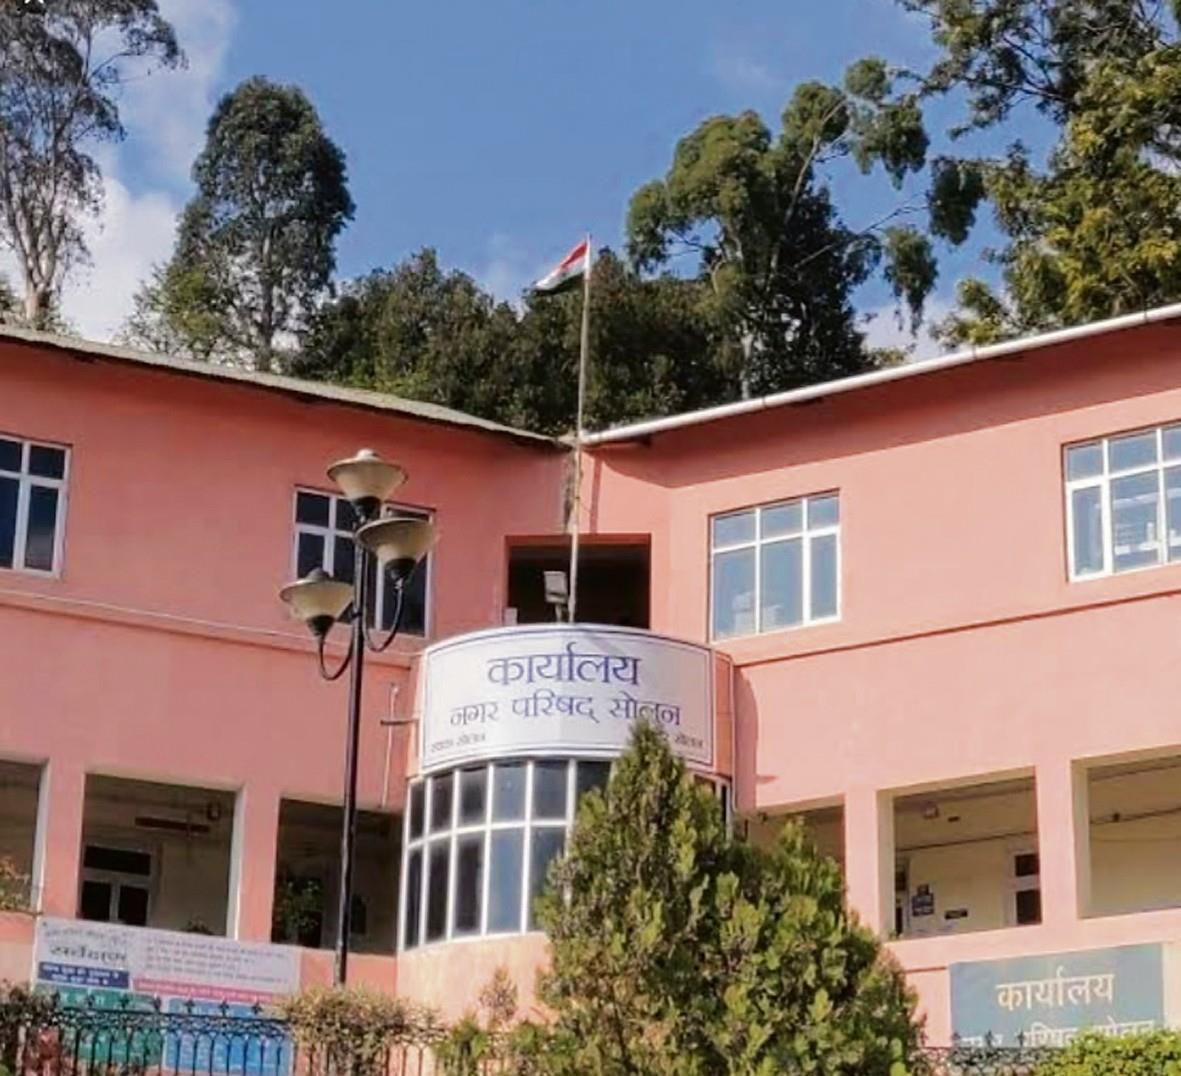 4 Congress councillors contest disqualification from Solan MC